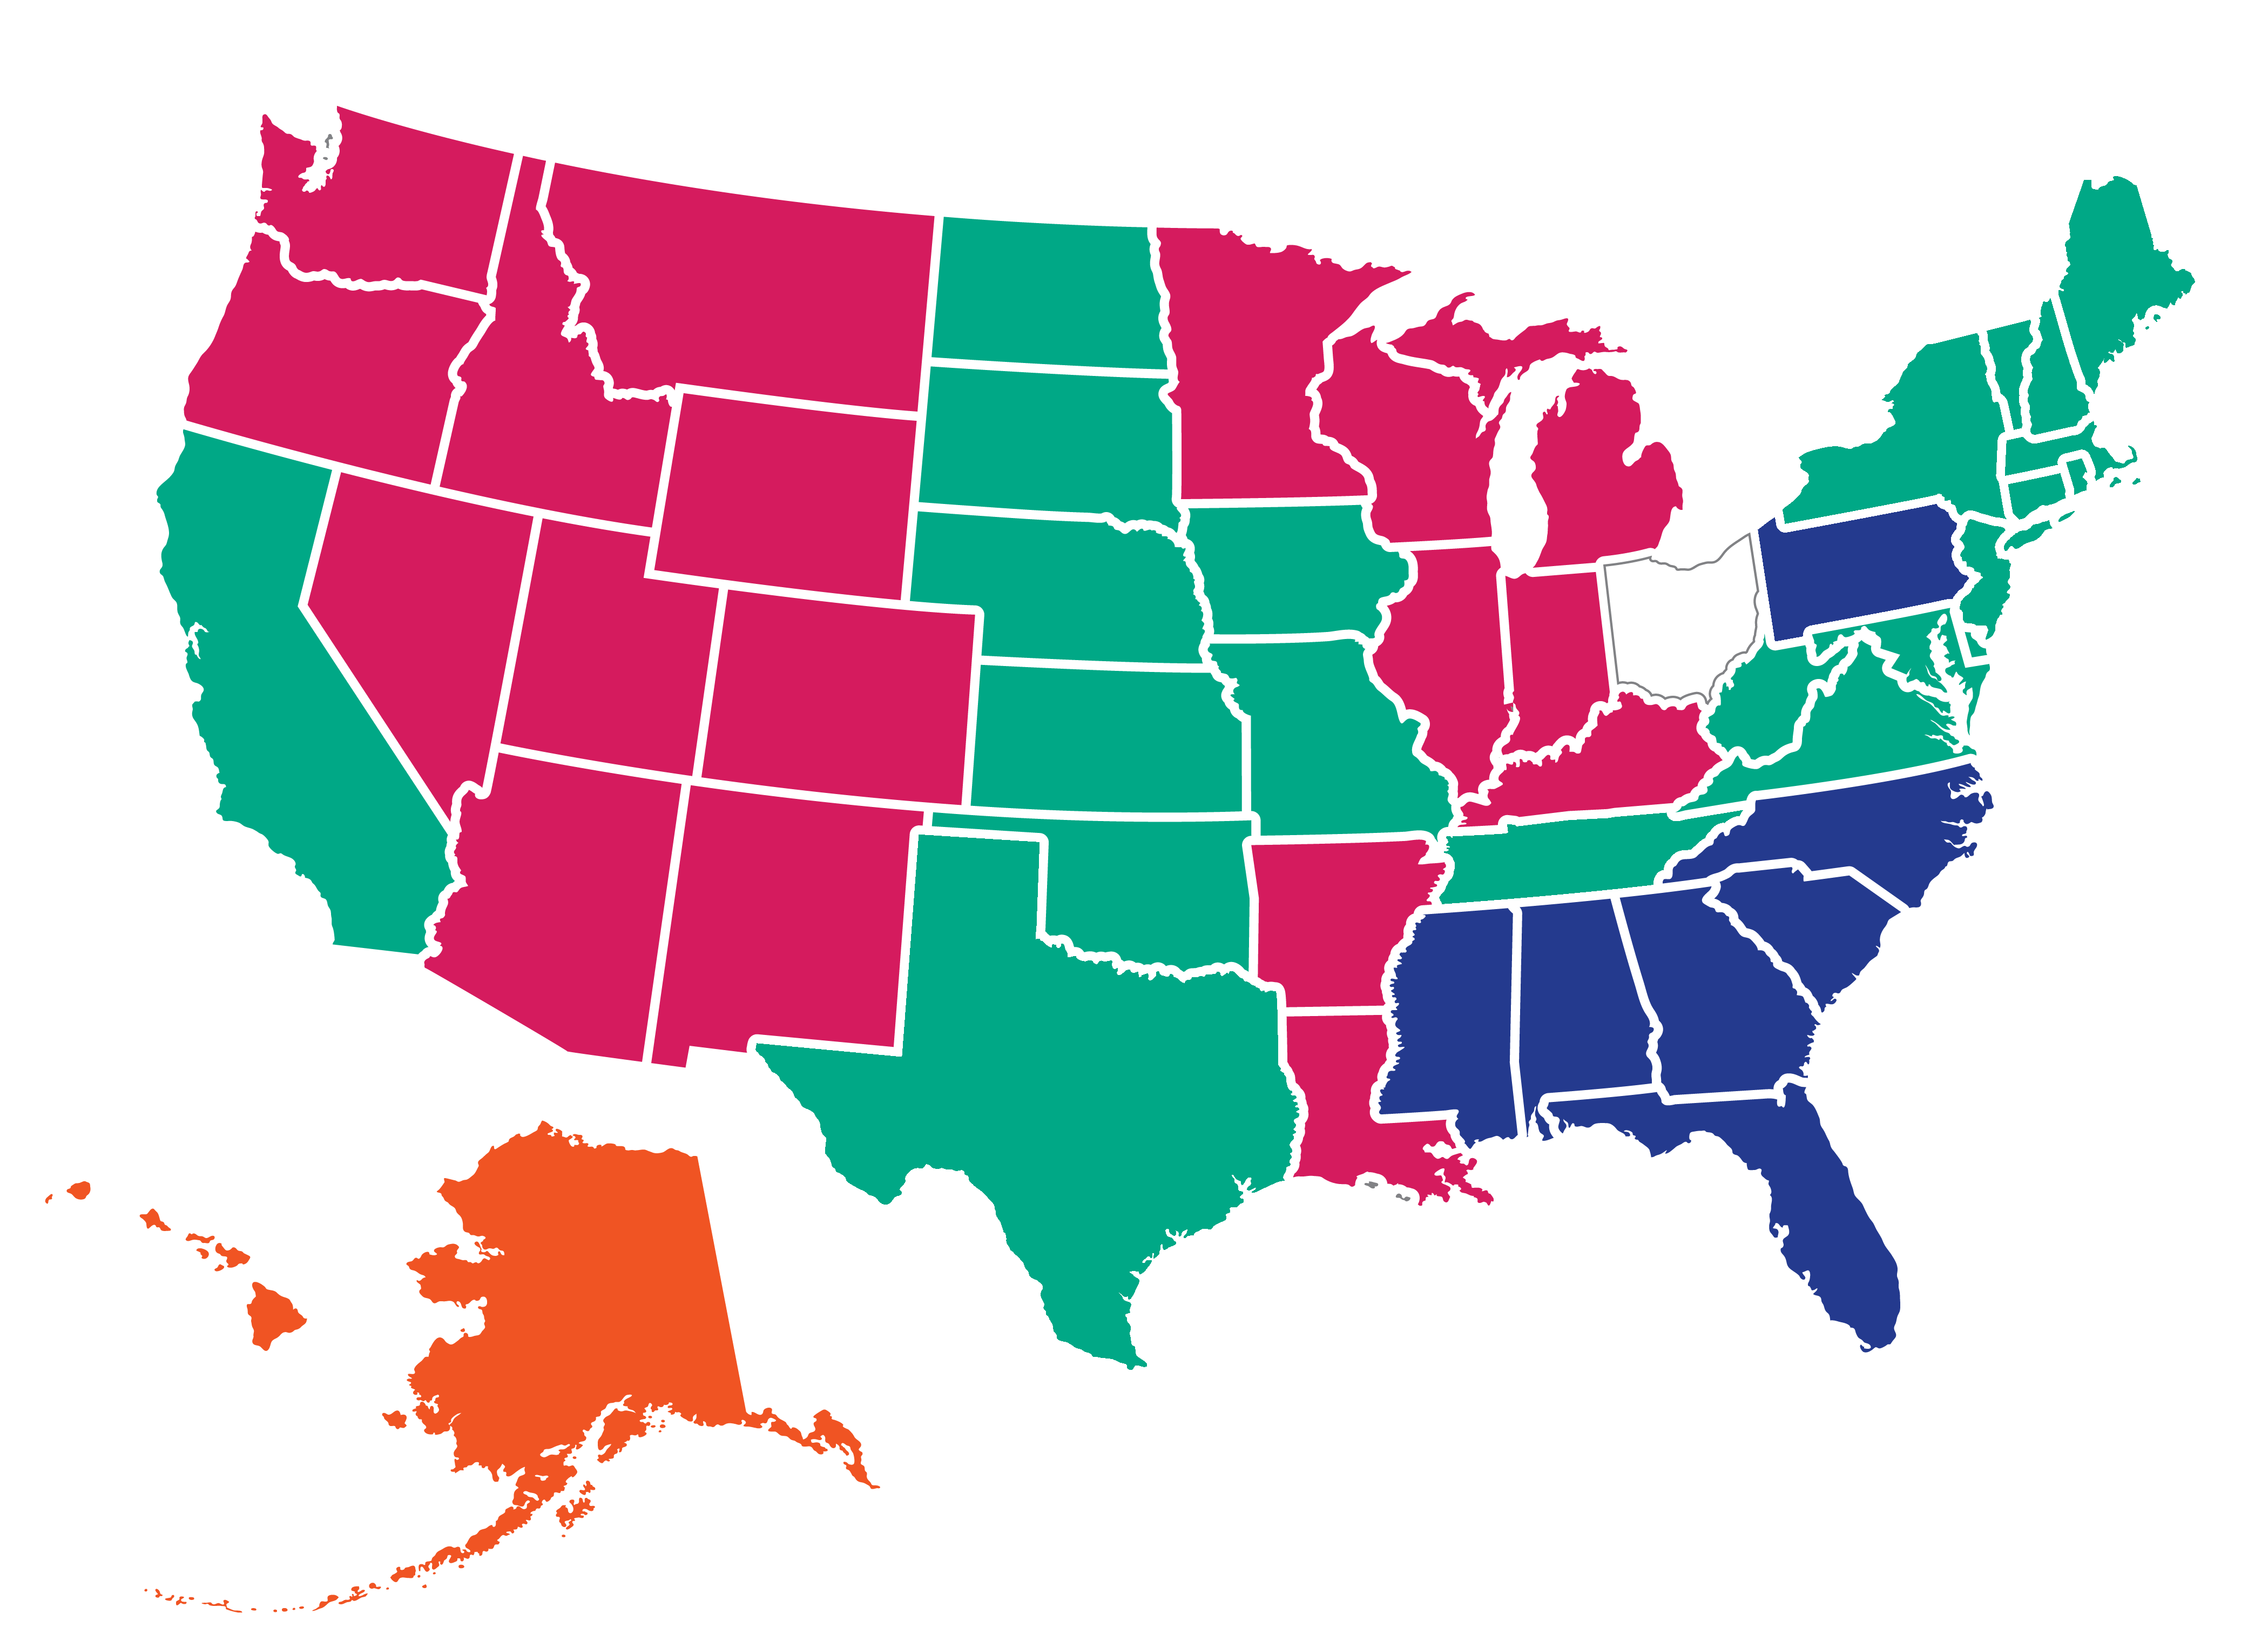 A color coded map of the united states